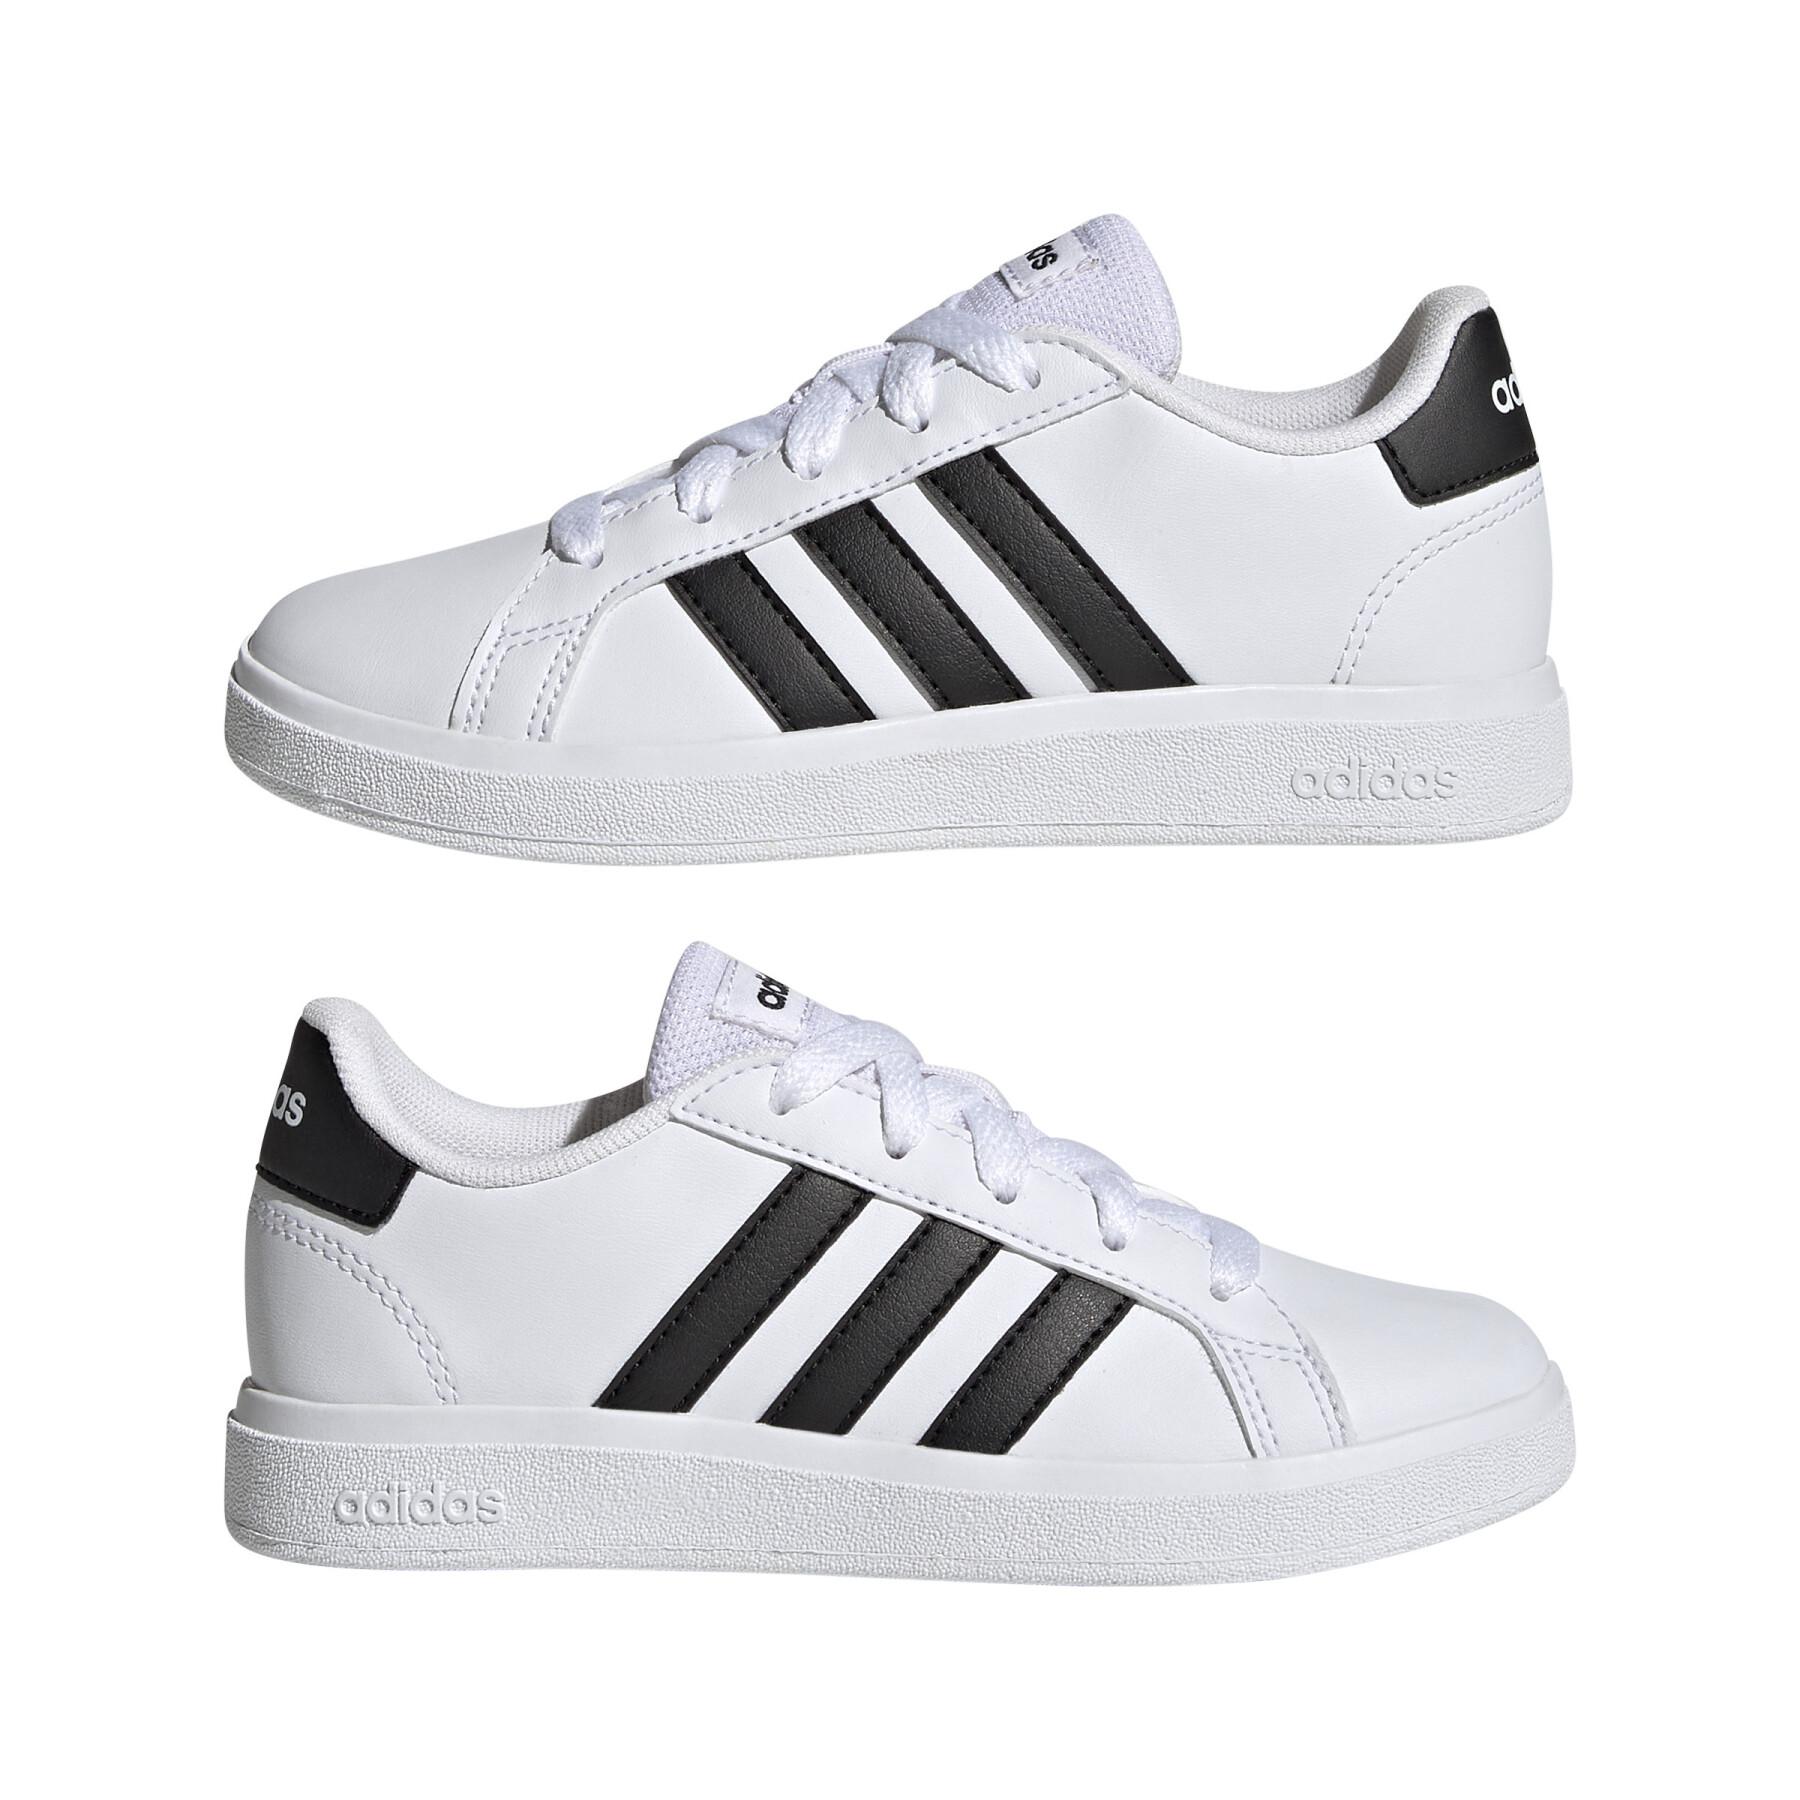 Children's lace-up sneakers adidas